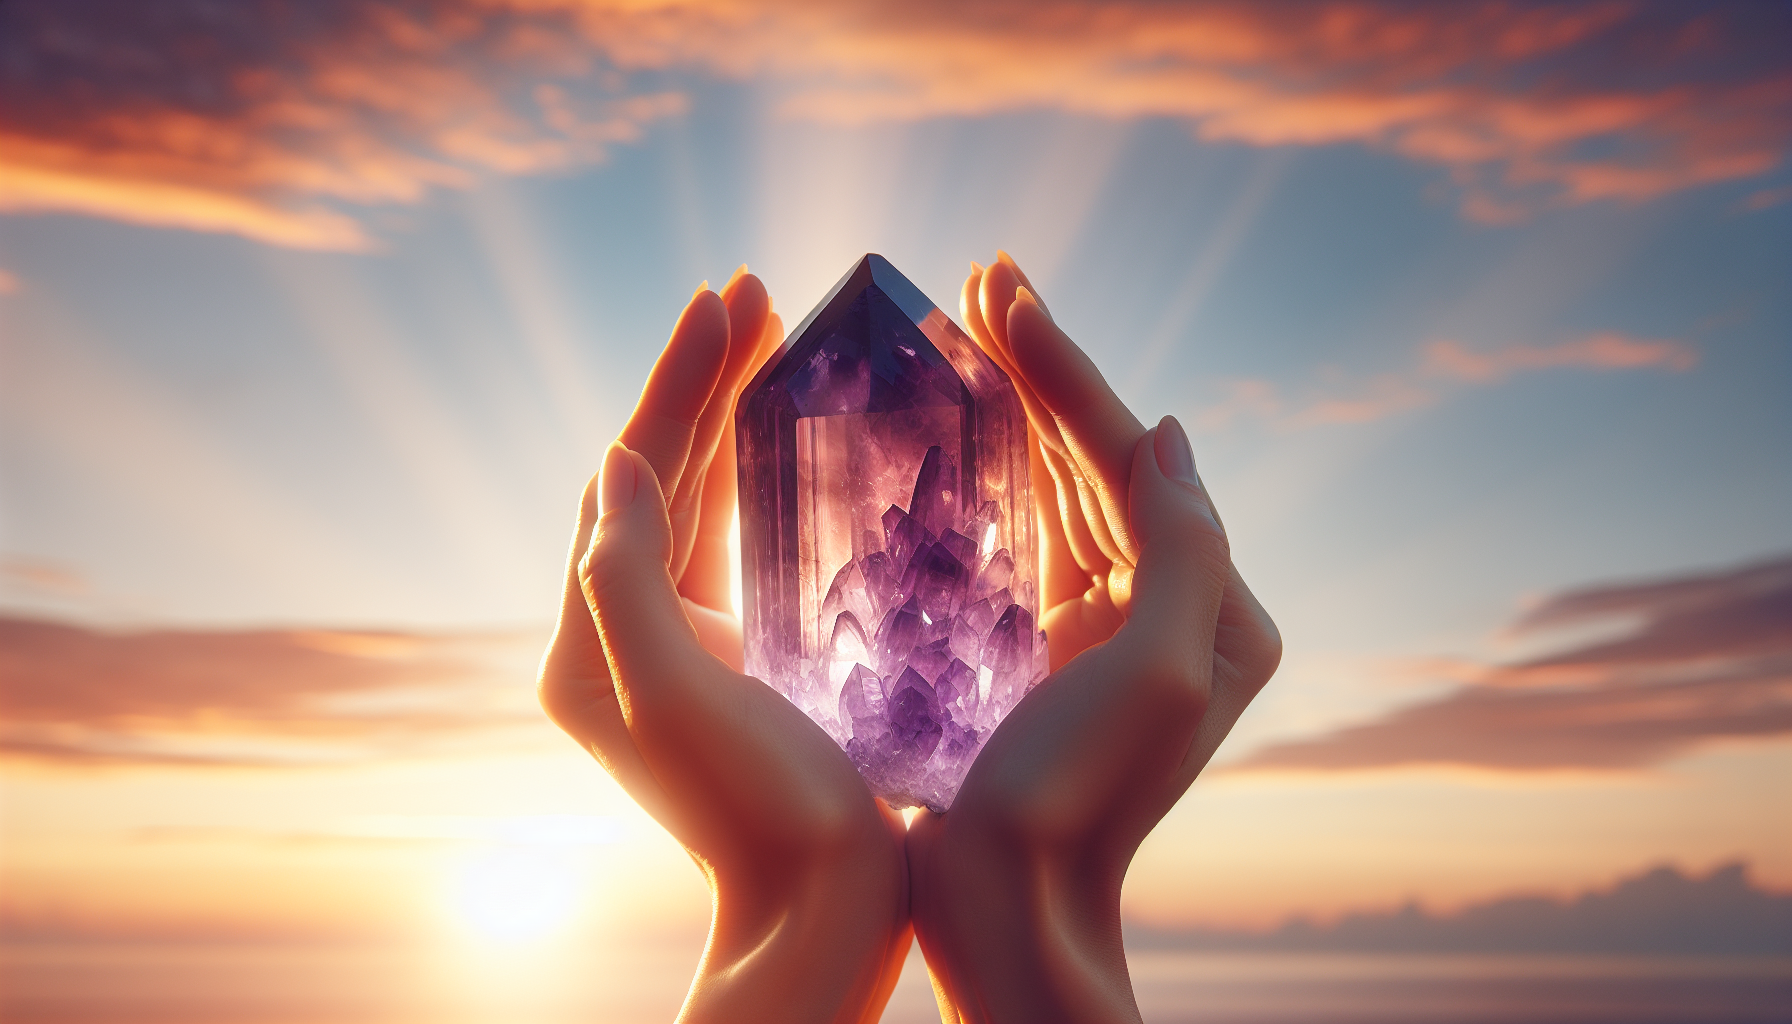 Cleansing and charging amethyst